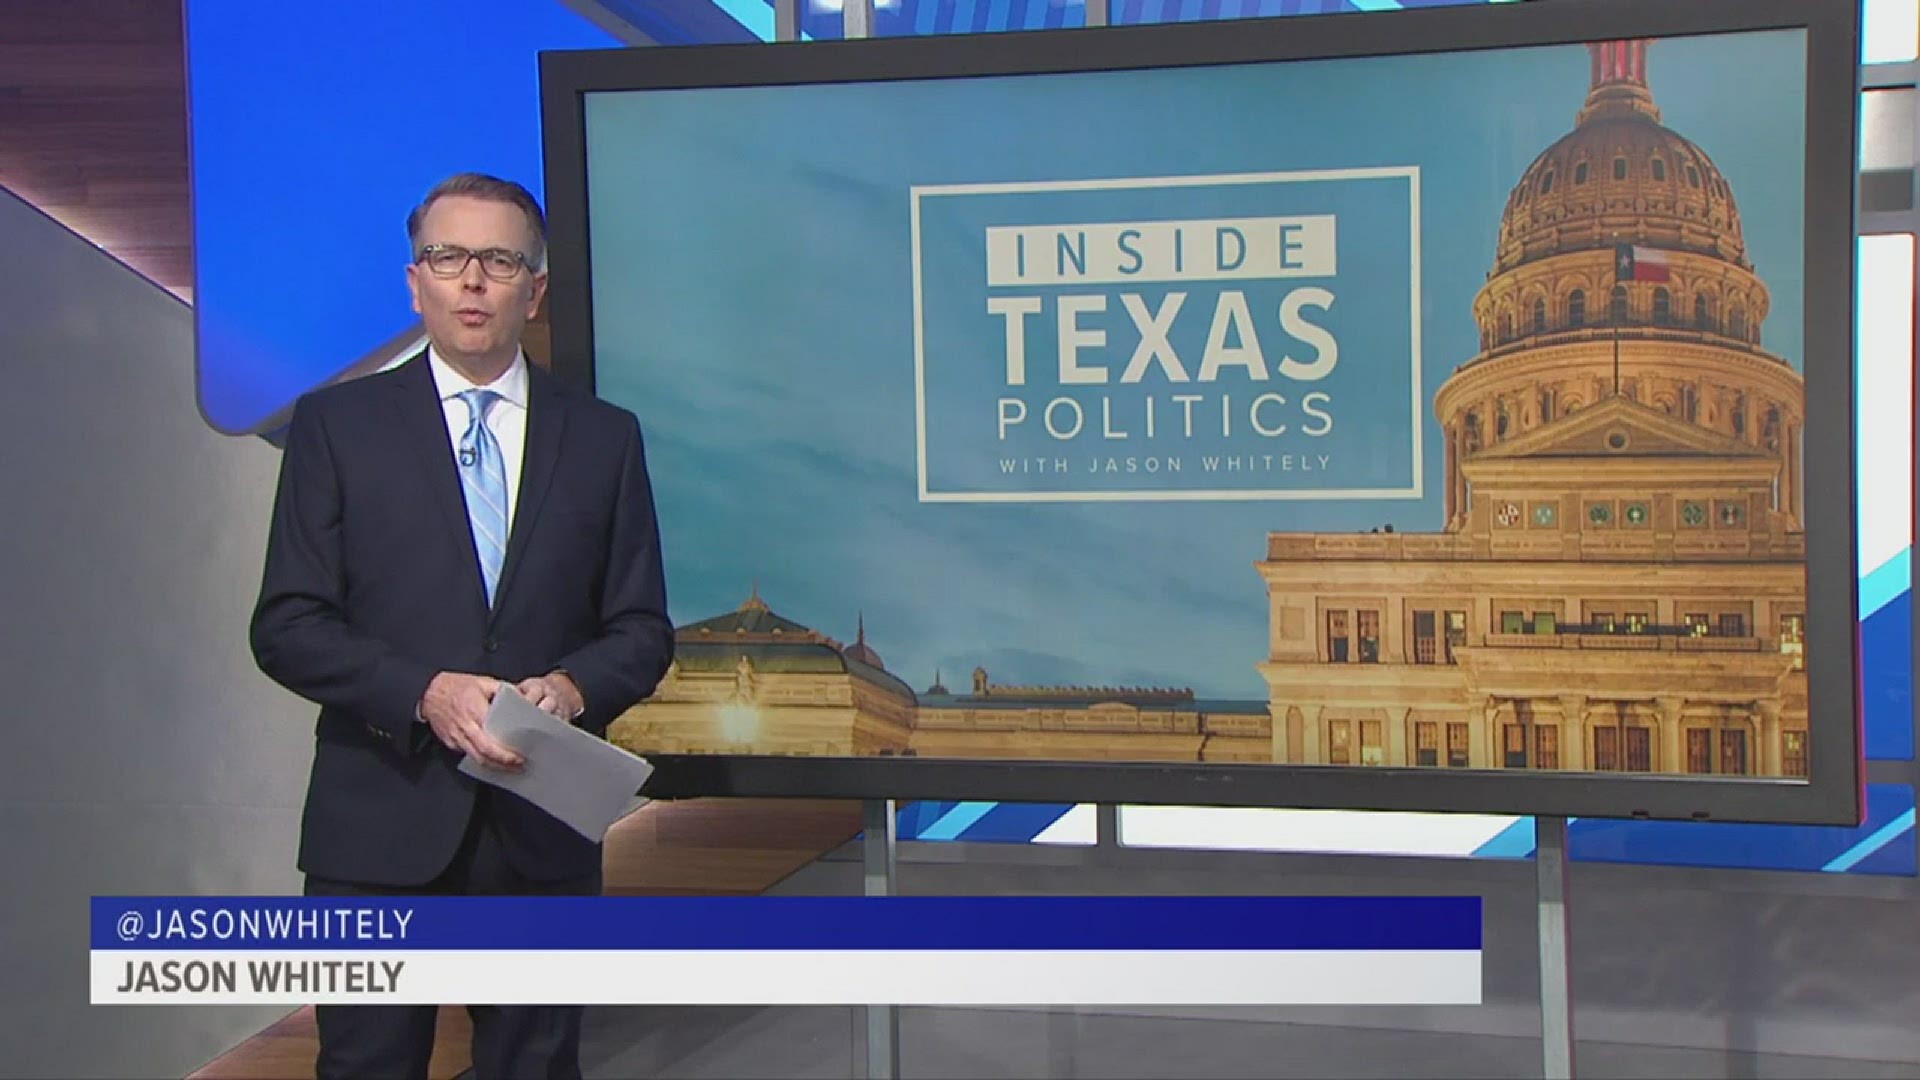 "I’m just really thrilled that the speaker had the faith and trust in me to lead,” said Rep. Victoria Neave, D-Dallas, on Sunday’s Inside Texas Politics.